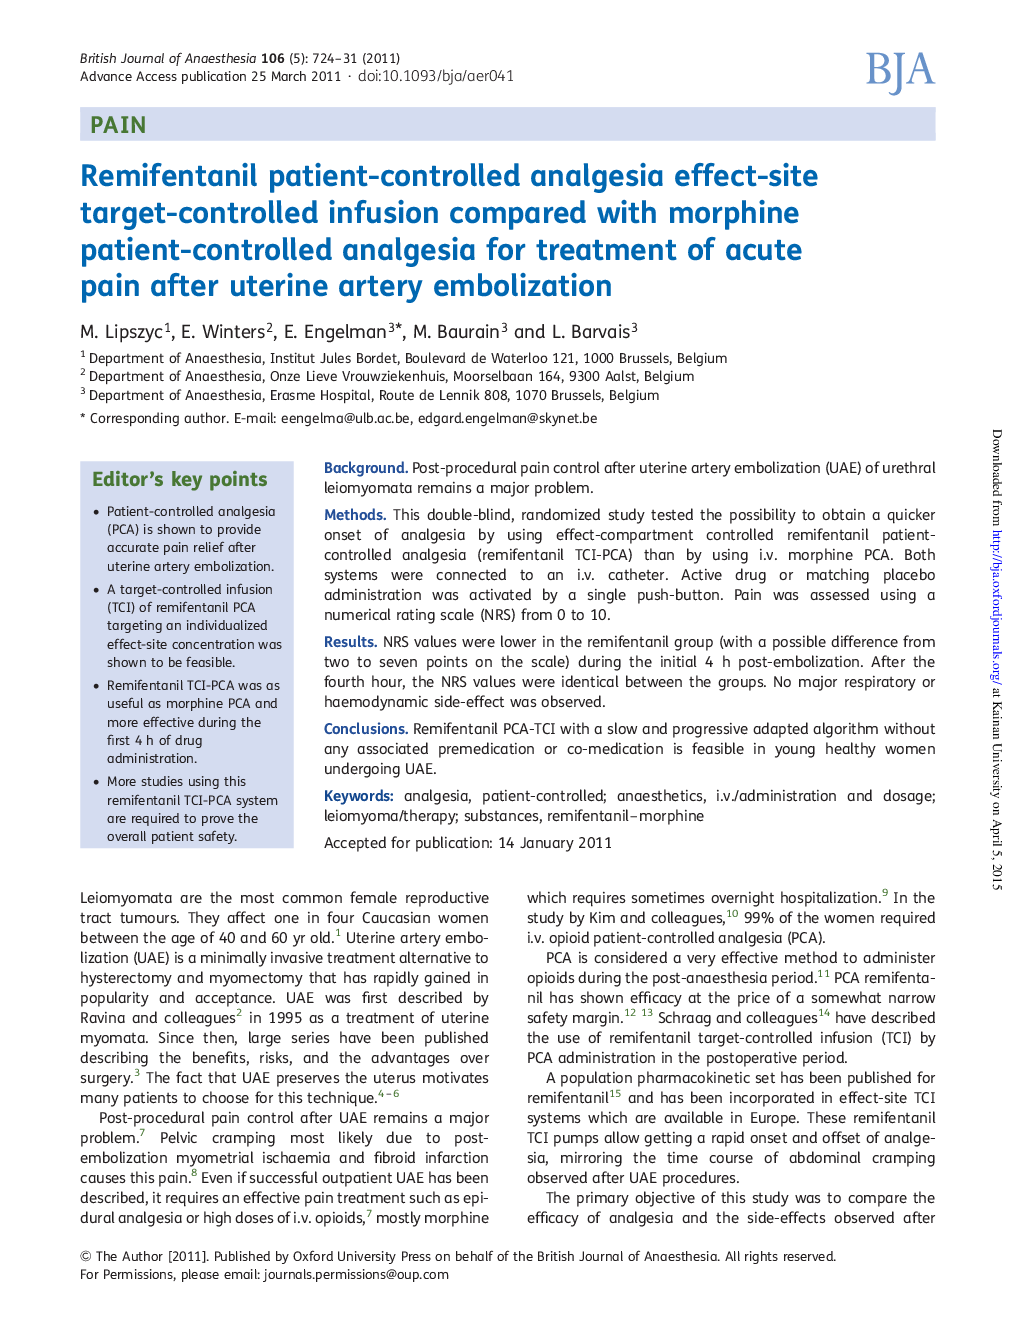 Remifentanil patient-controlled analgesia effect-site target-controlled infusion compared with morphine patient-controlled analgesia for treatment of acute pain after uterine artery embolization